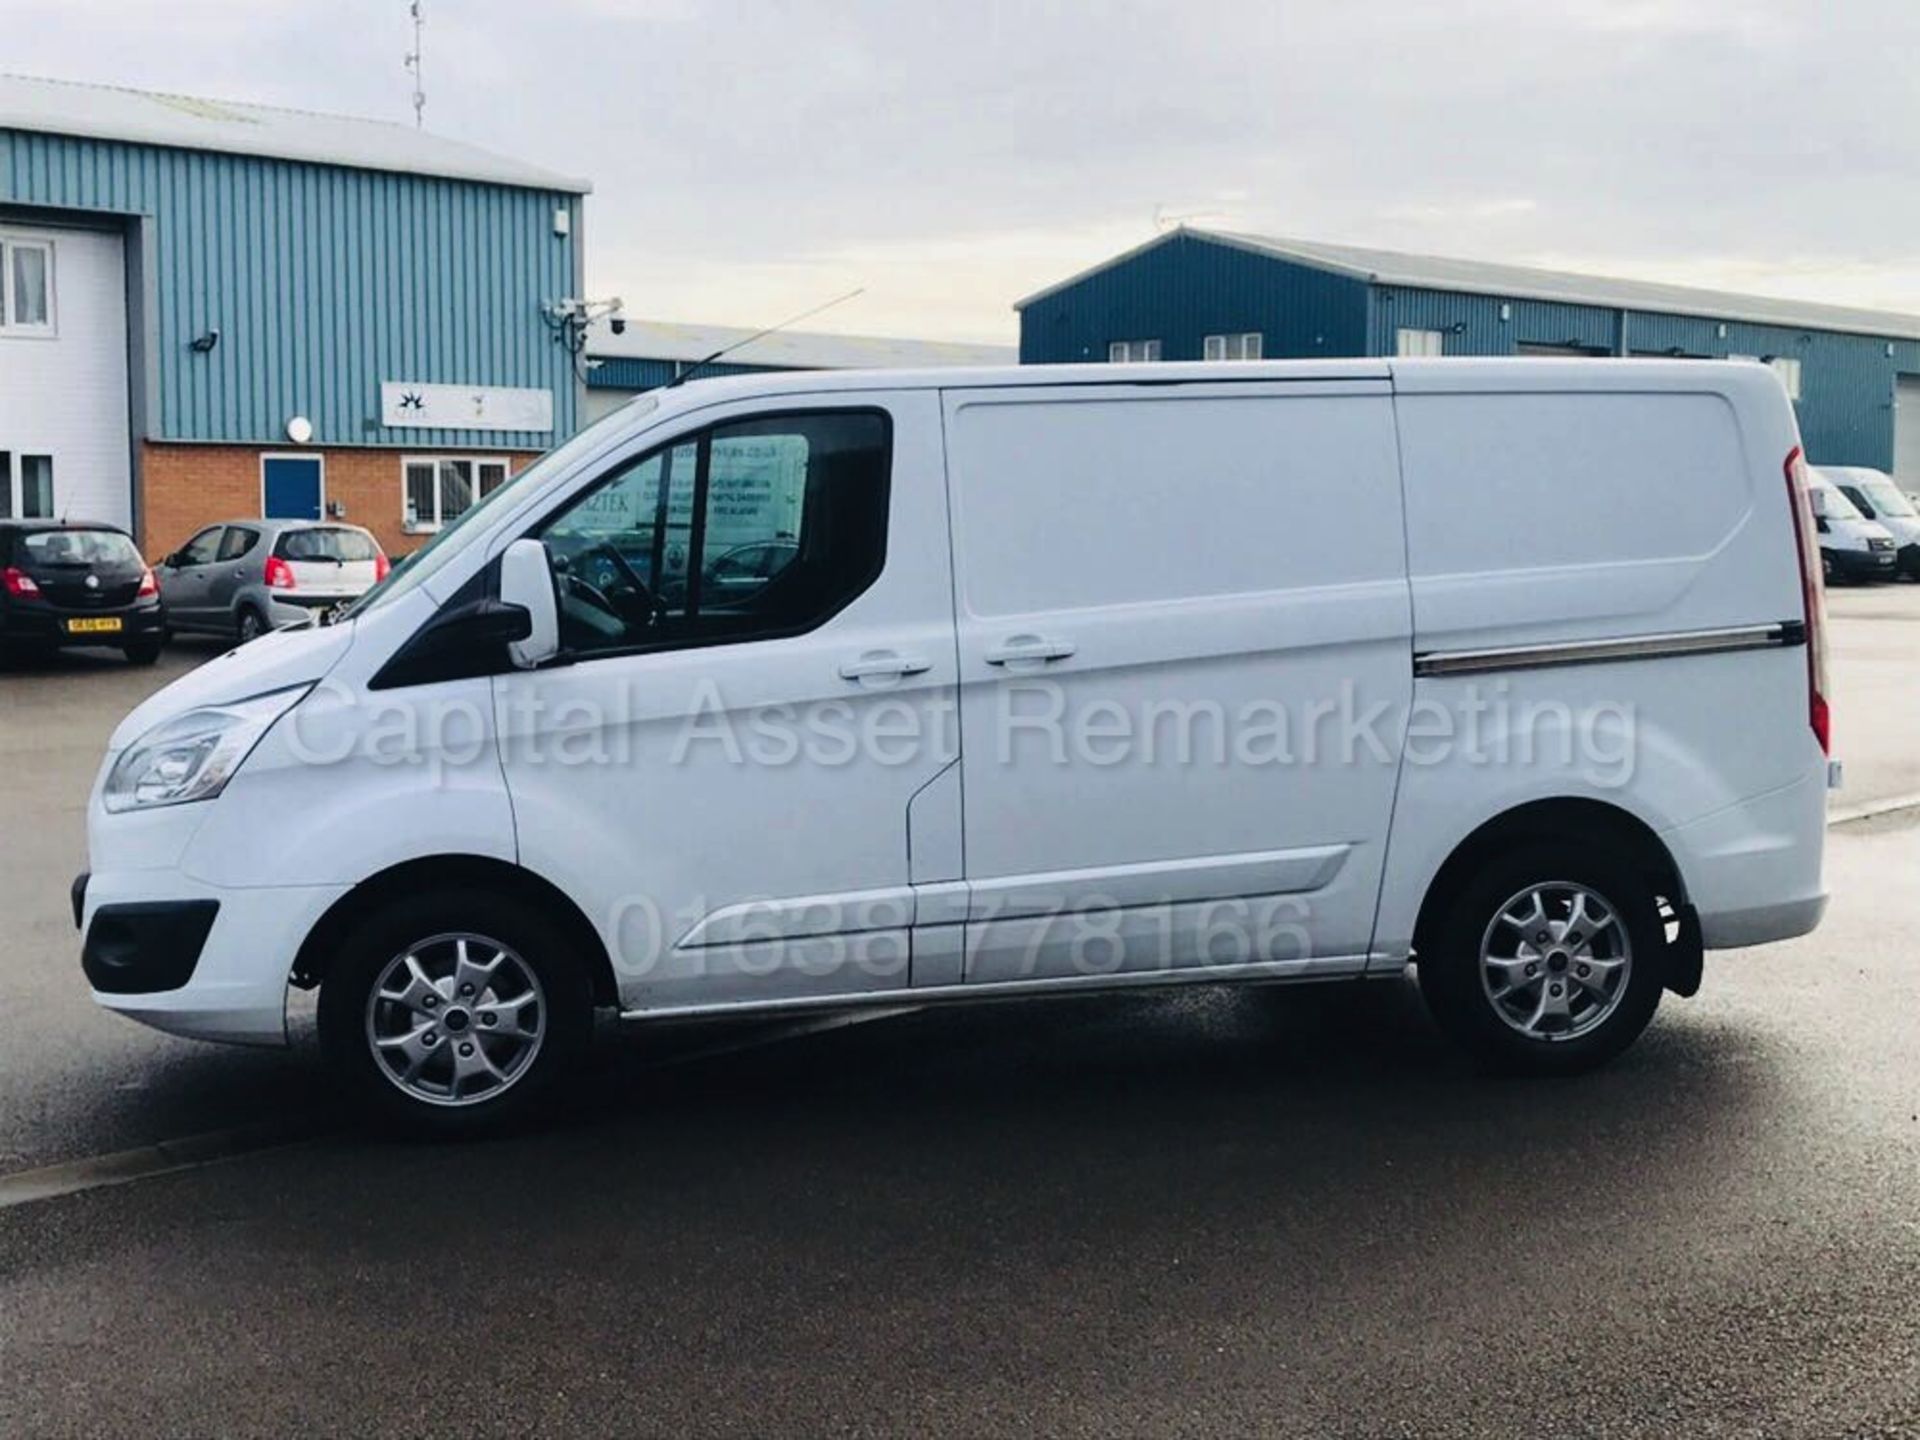 (On Sale) FORD TRANSIT CUSTOM 'LIMITED SPEC' (2013 - NEW MODEL) '2.2 TDCI - 6 SPEED' *A/C* (NO VAT) - Image 4 of 32